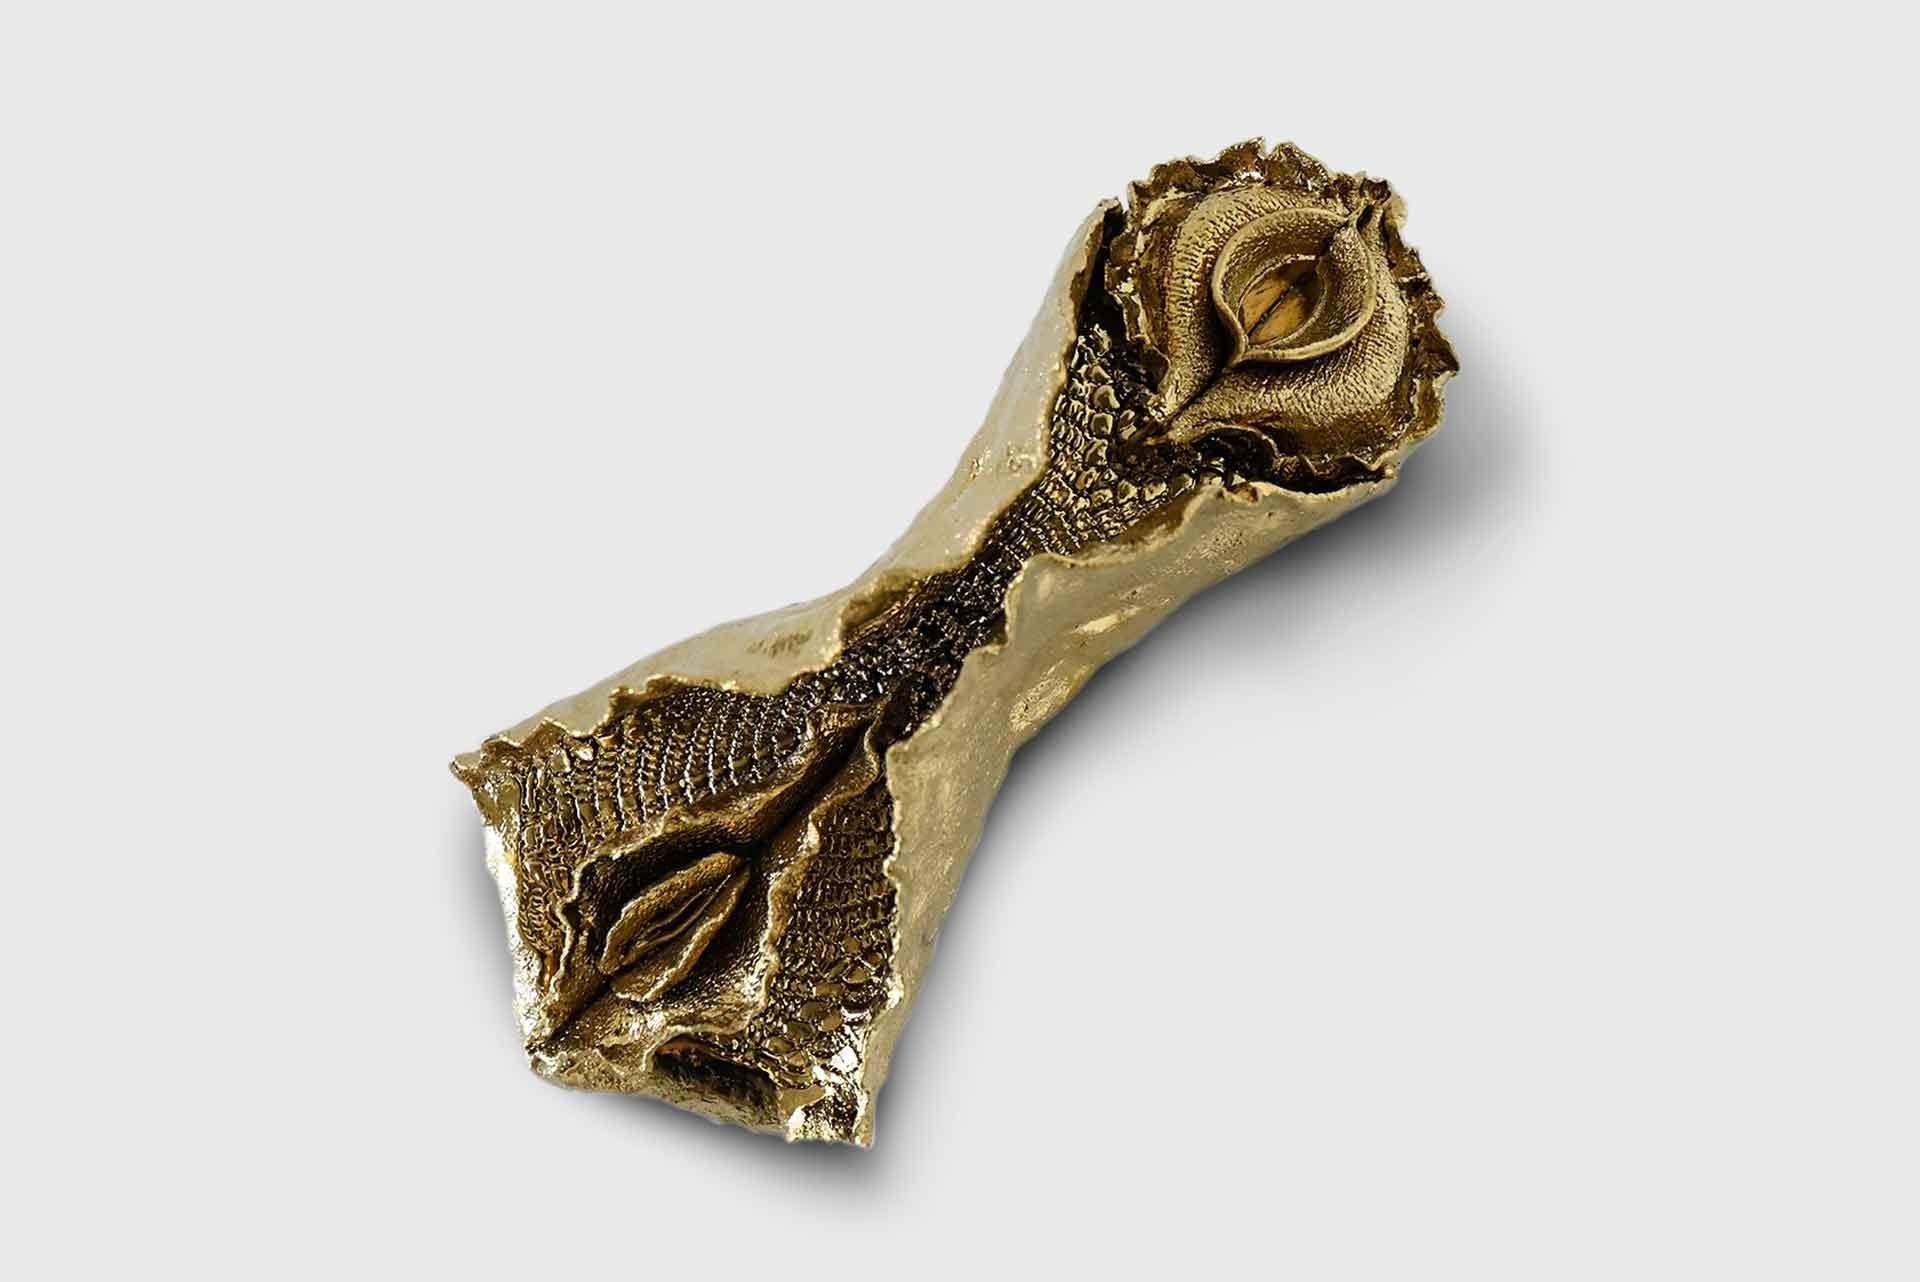 Ceramic wall piece model #12
Manufactured by Liu Xi
China, 2021
Ceramic, gold chroming

From the series “Our God is Great” Liu Xi’s gilded ceramic sculptures hang with their particular floral and vulval forms in full view of the spectator. The